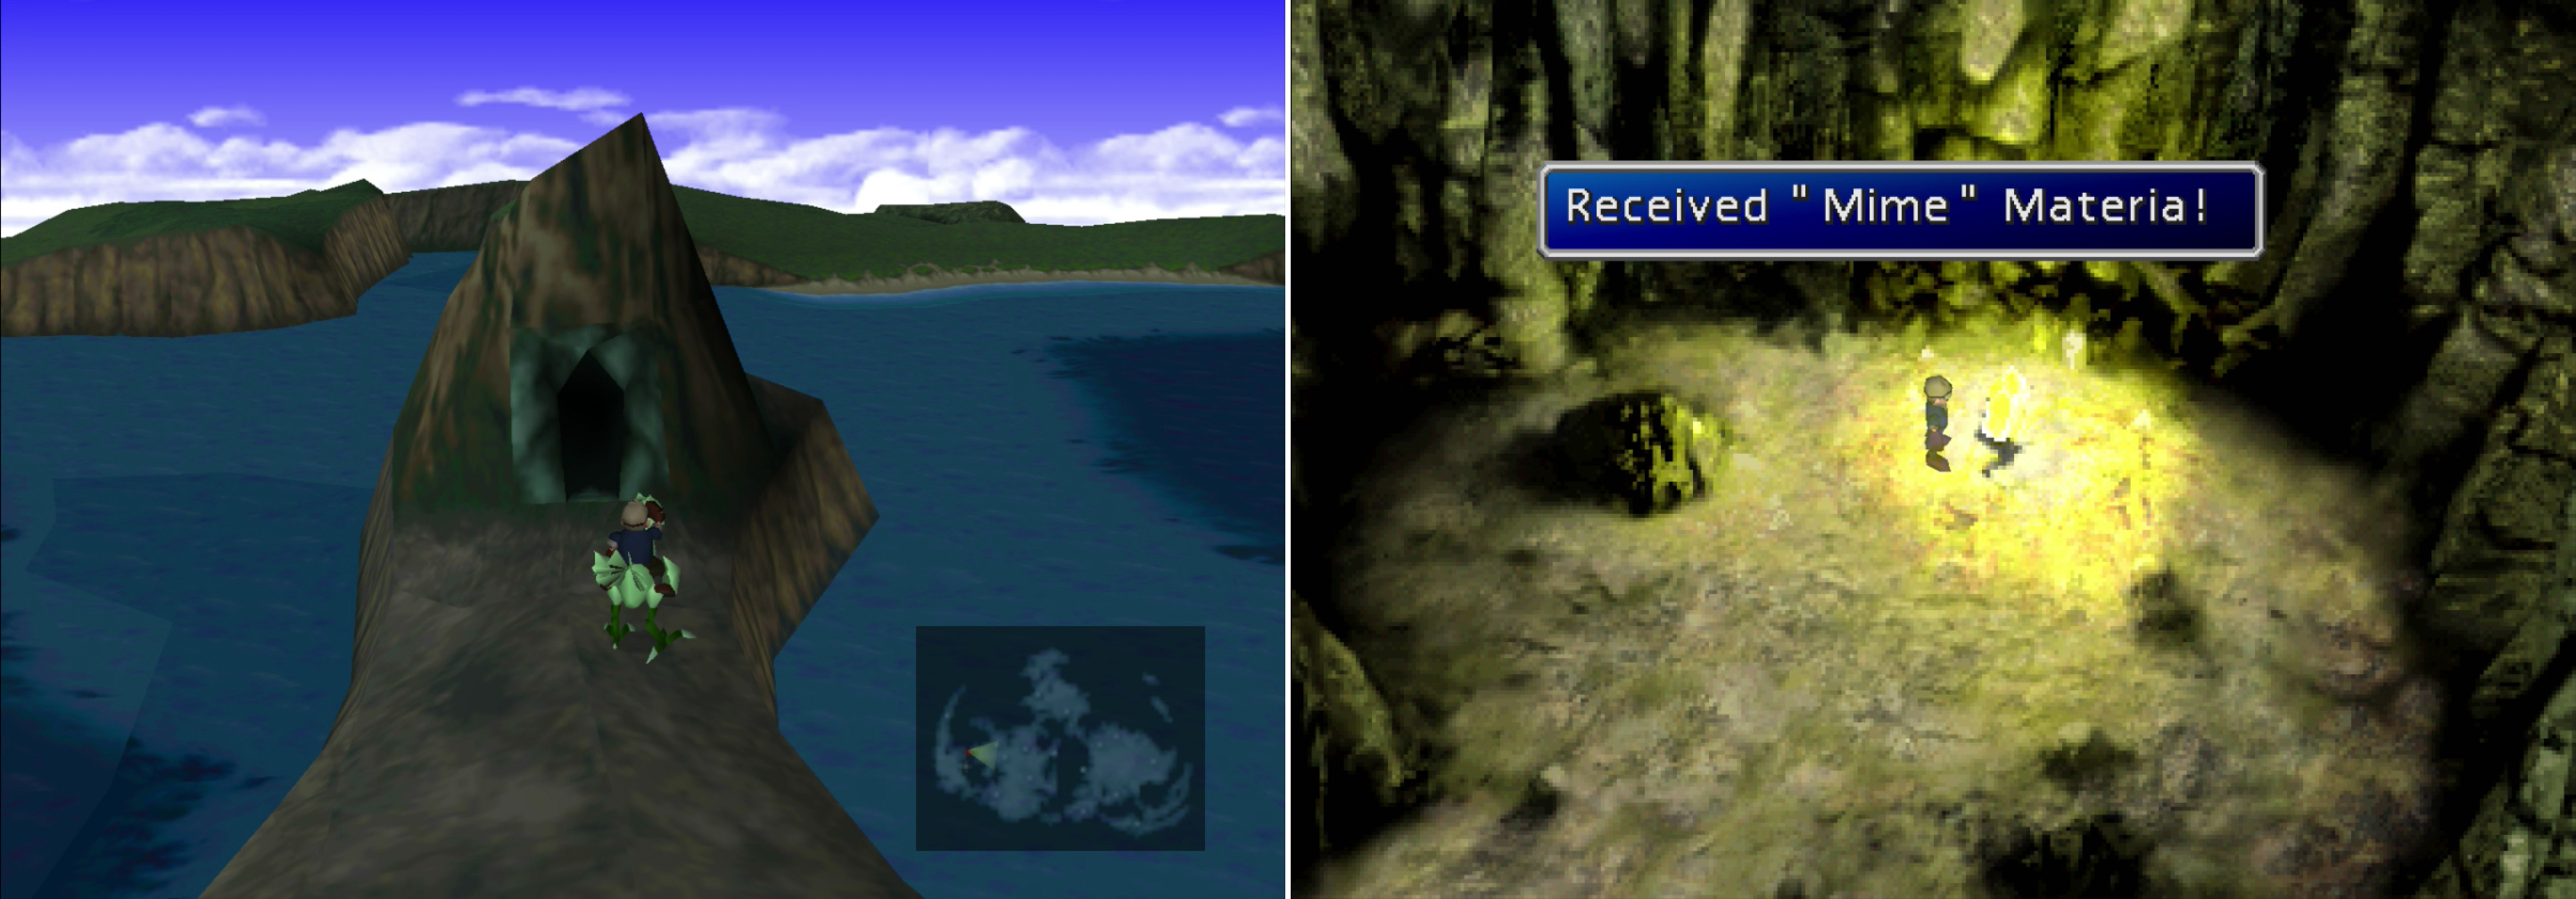 Find a cave near Wutai, which can be reached by riding a Green Chocobo (left). Inside you'll find the immensely useful Mime Materia (right).